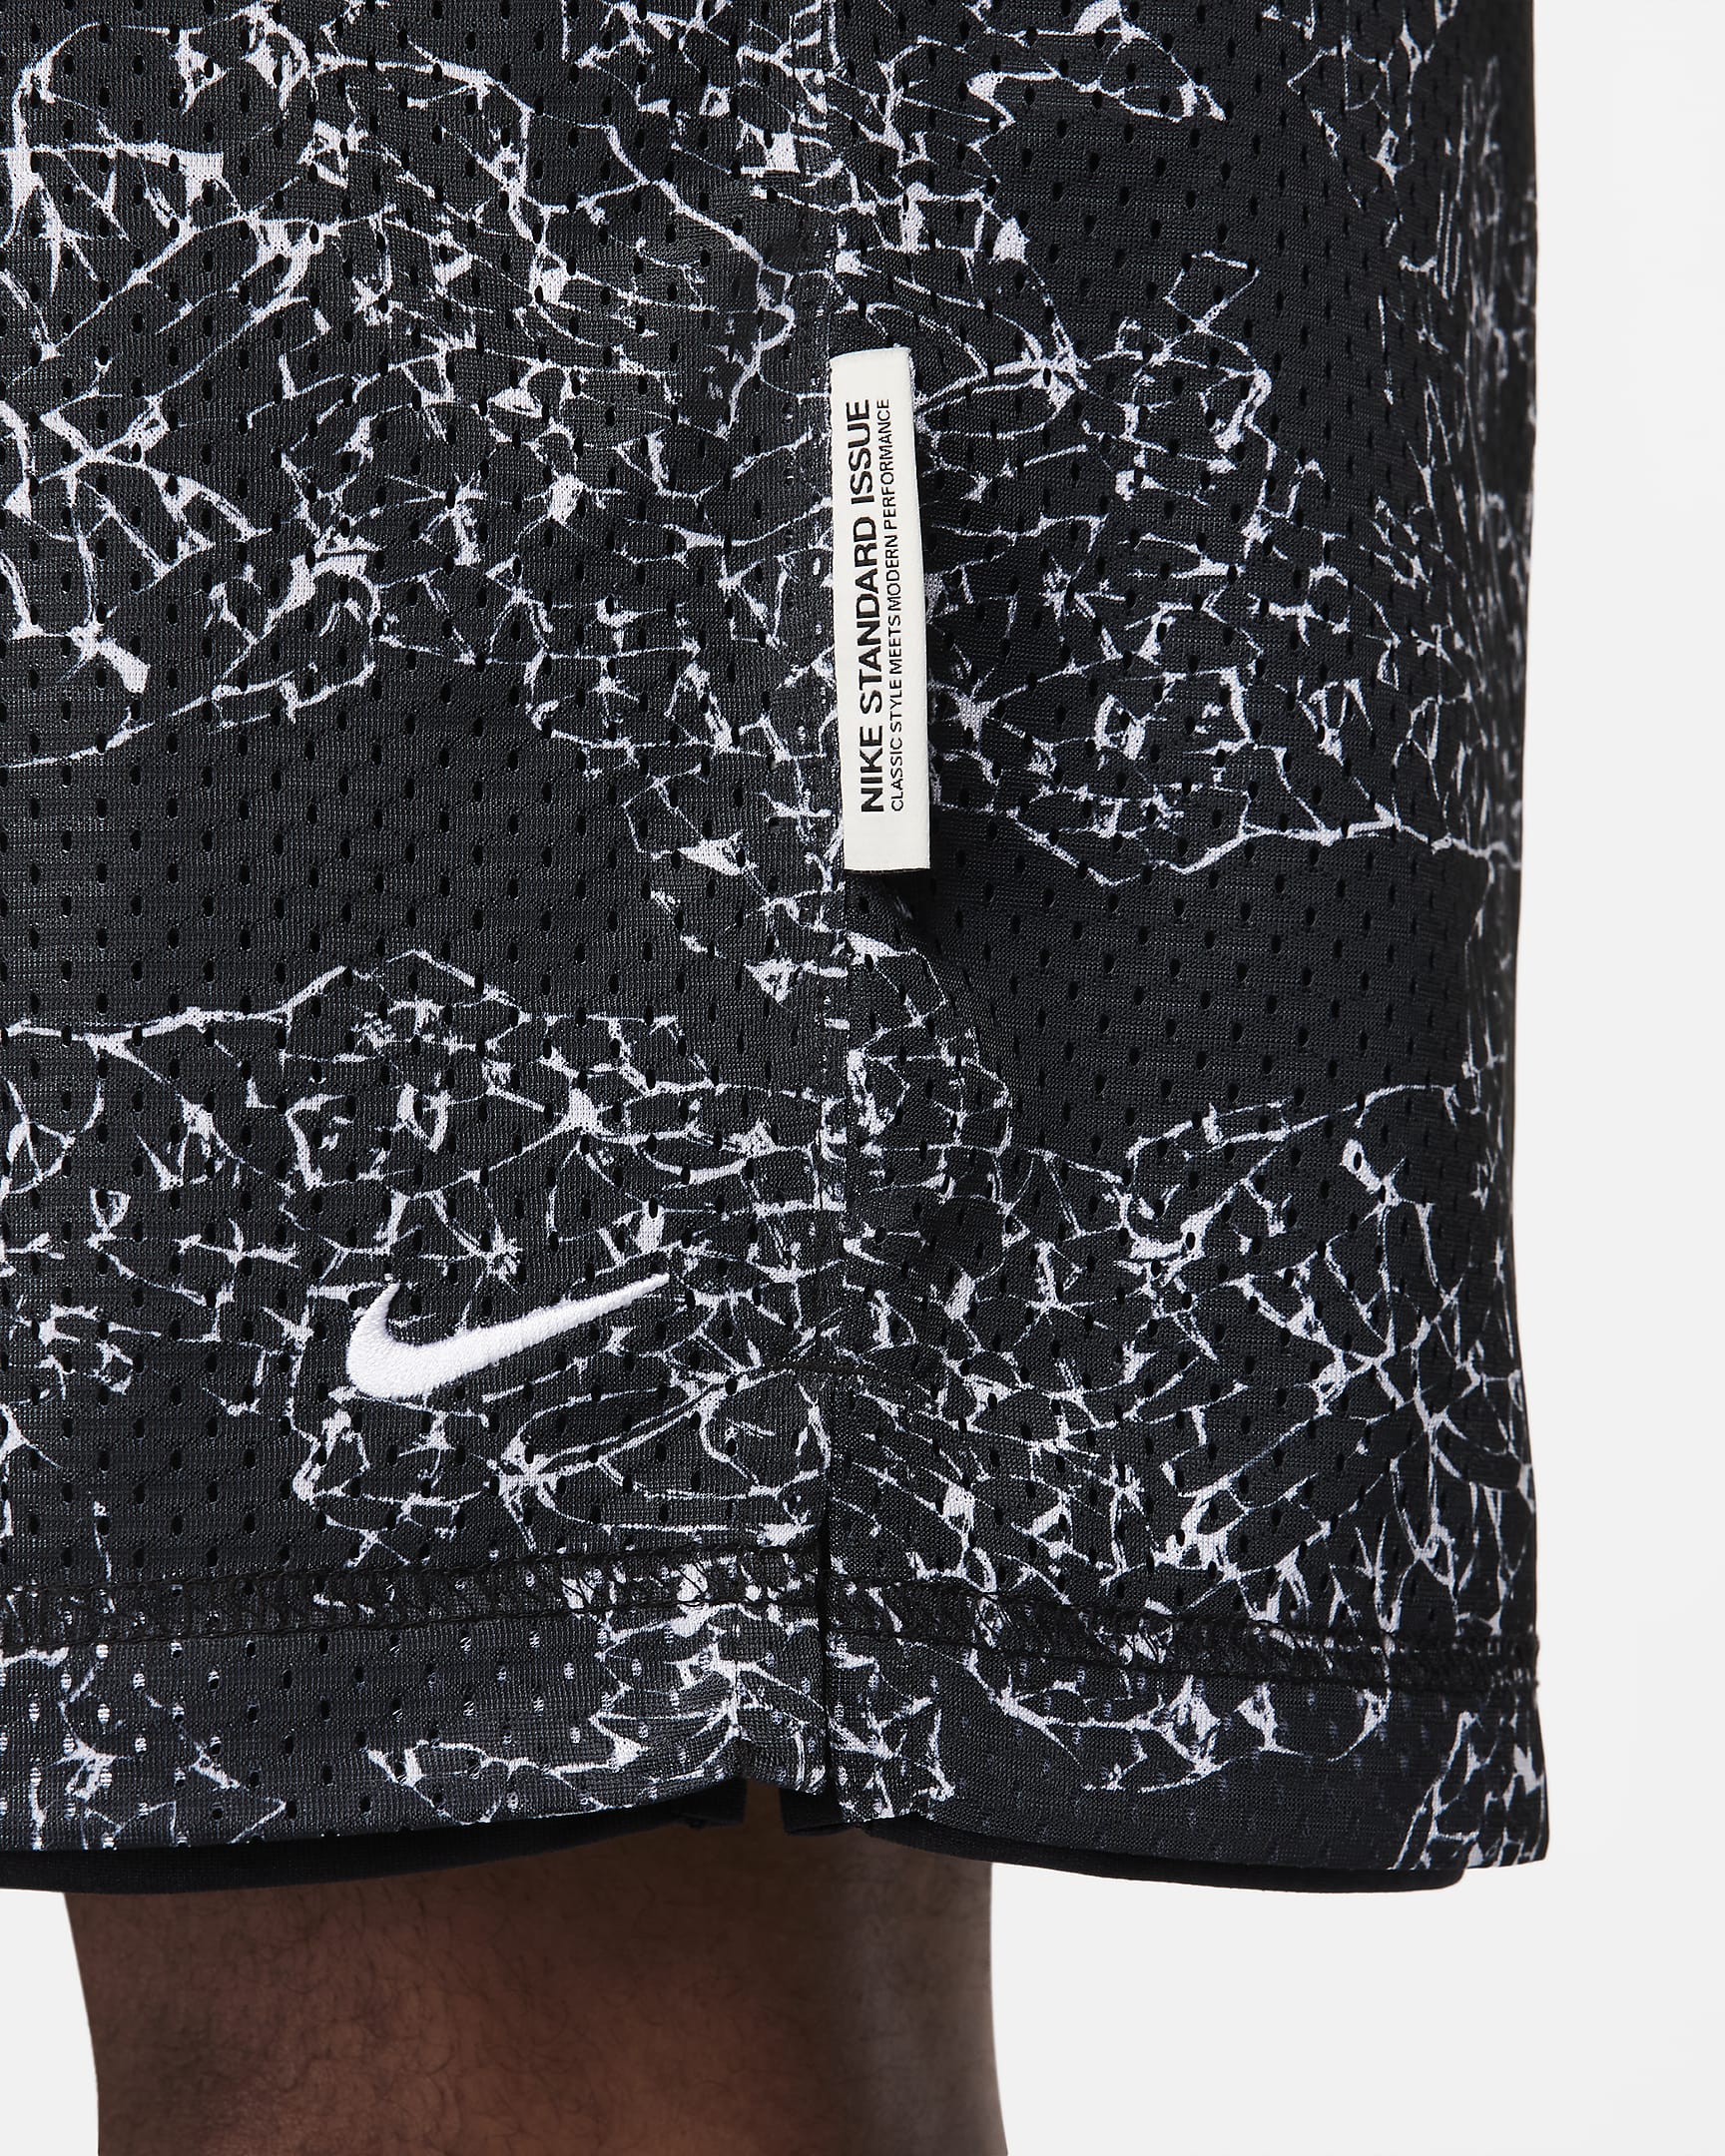 Nike Dri-FIT Standard Issue Men's 15cm (approx.) Reversible Basketball ...